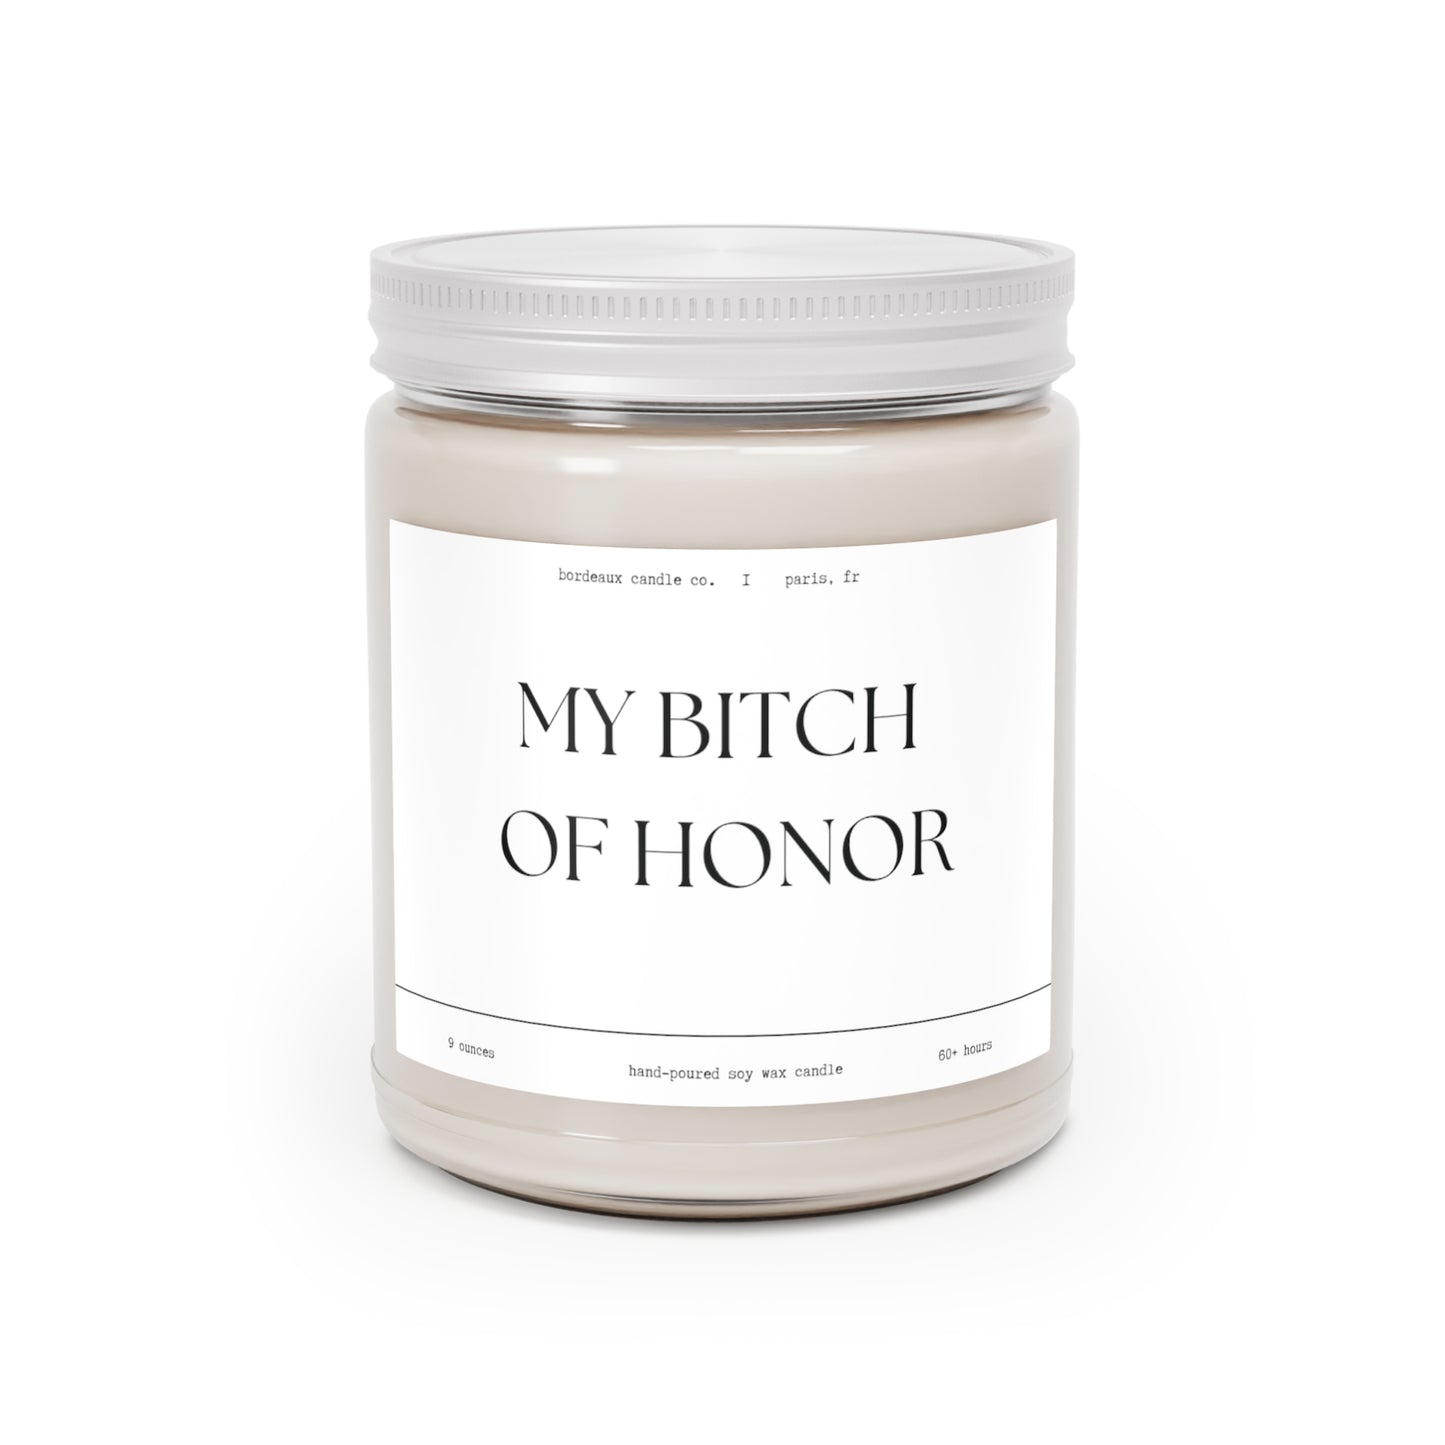 Bitch of Honor, Scented Candle, 9oz,